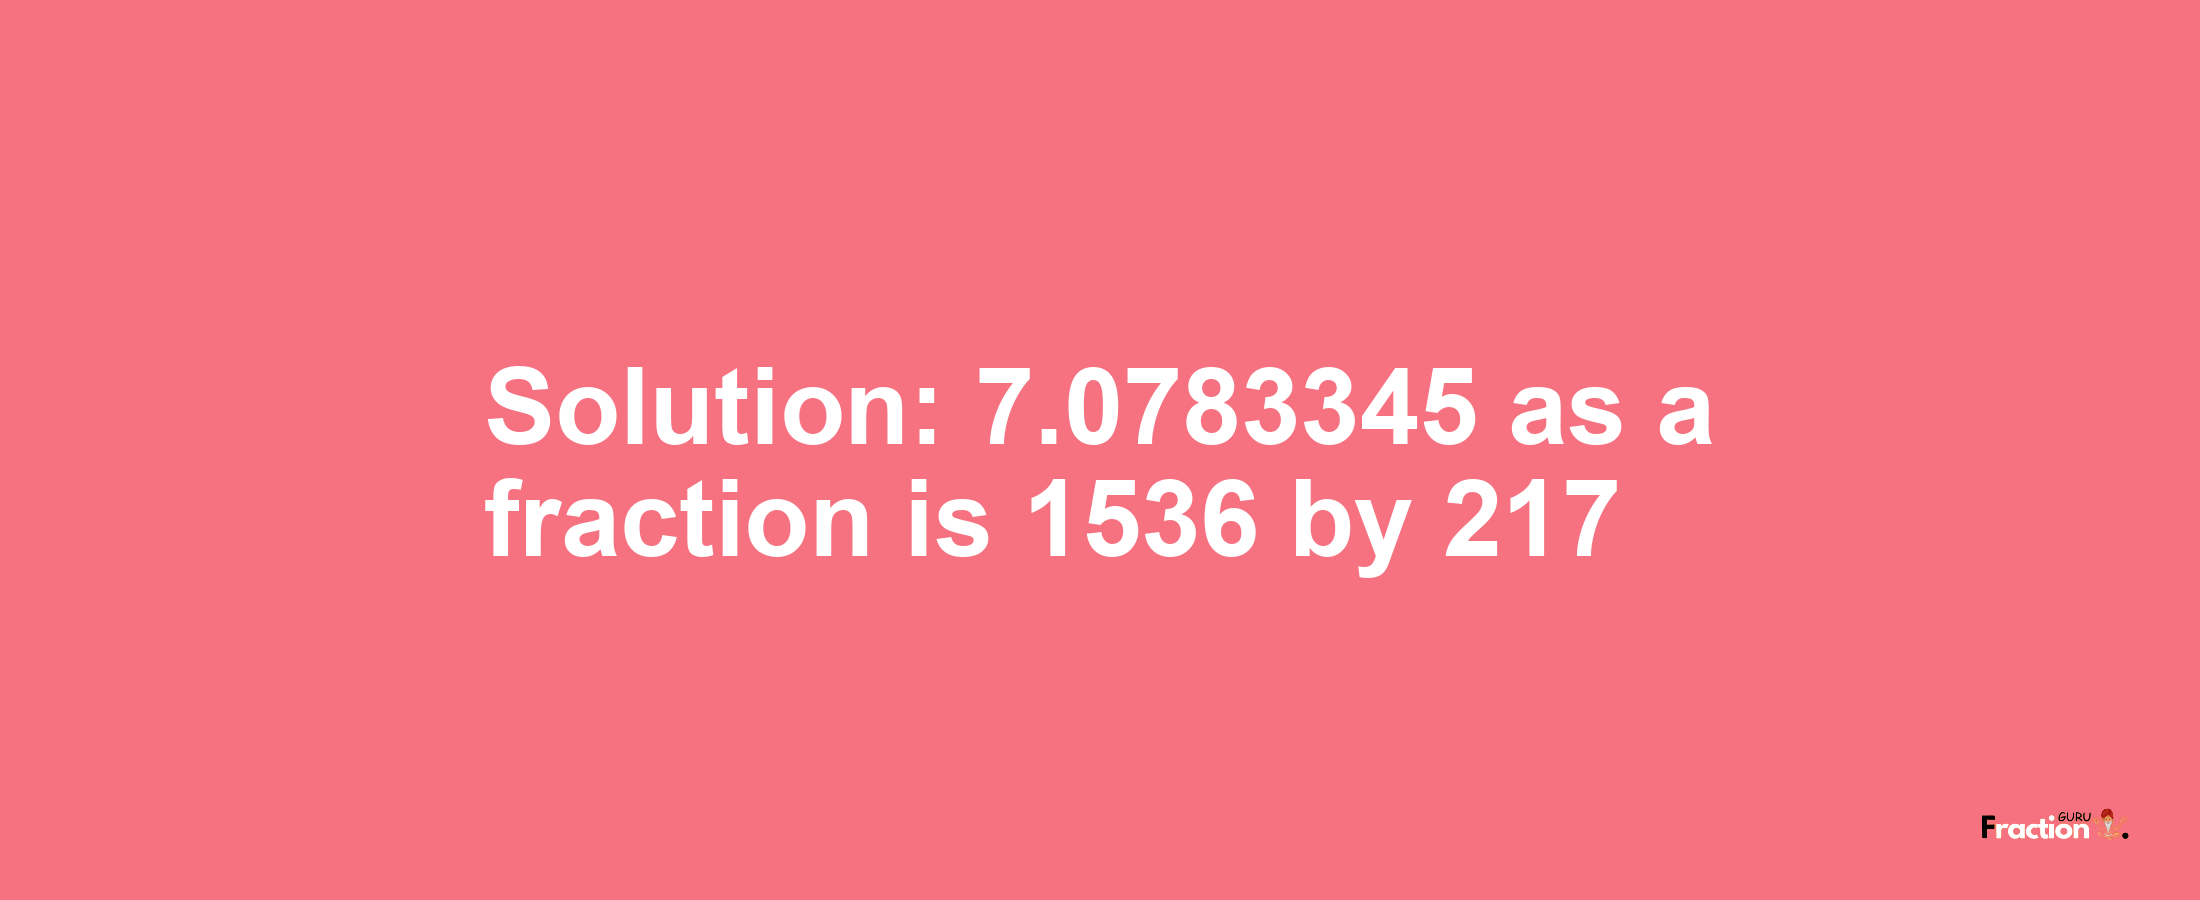 Solution:7.0783345 as a fraction is 1536/217